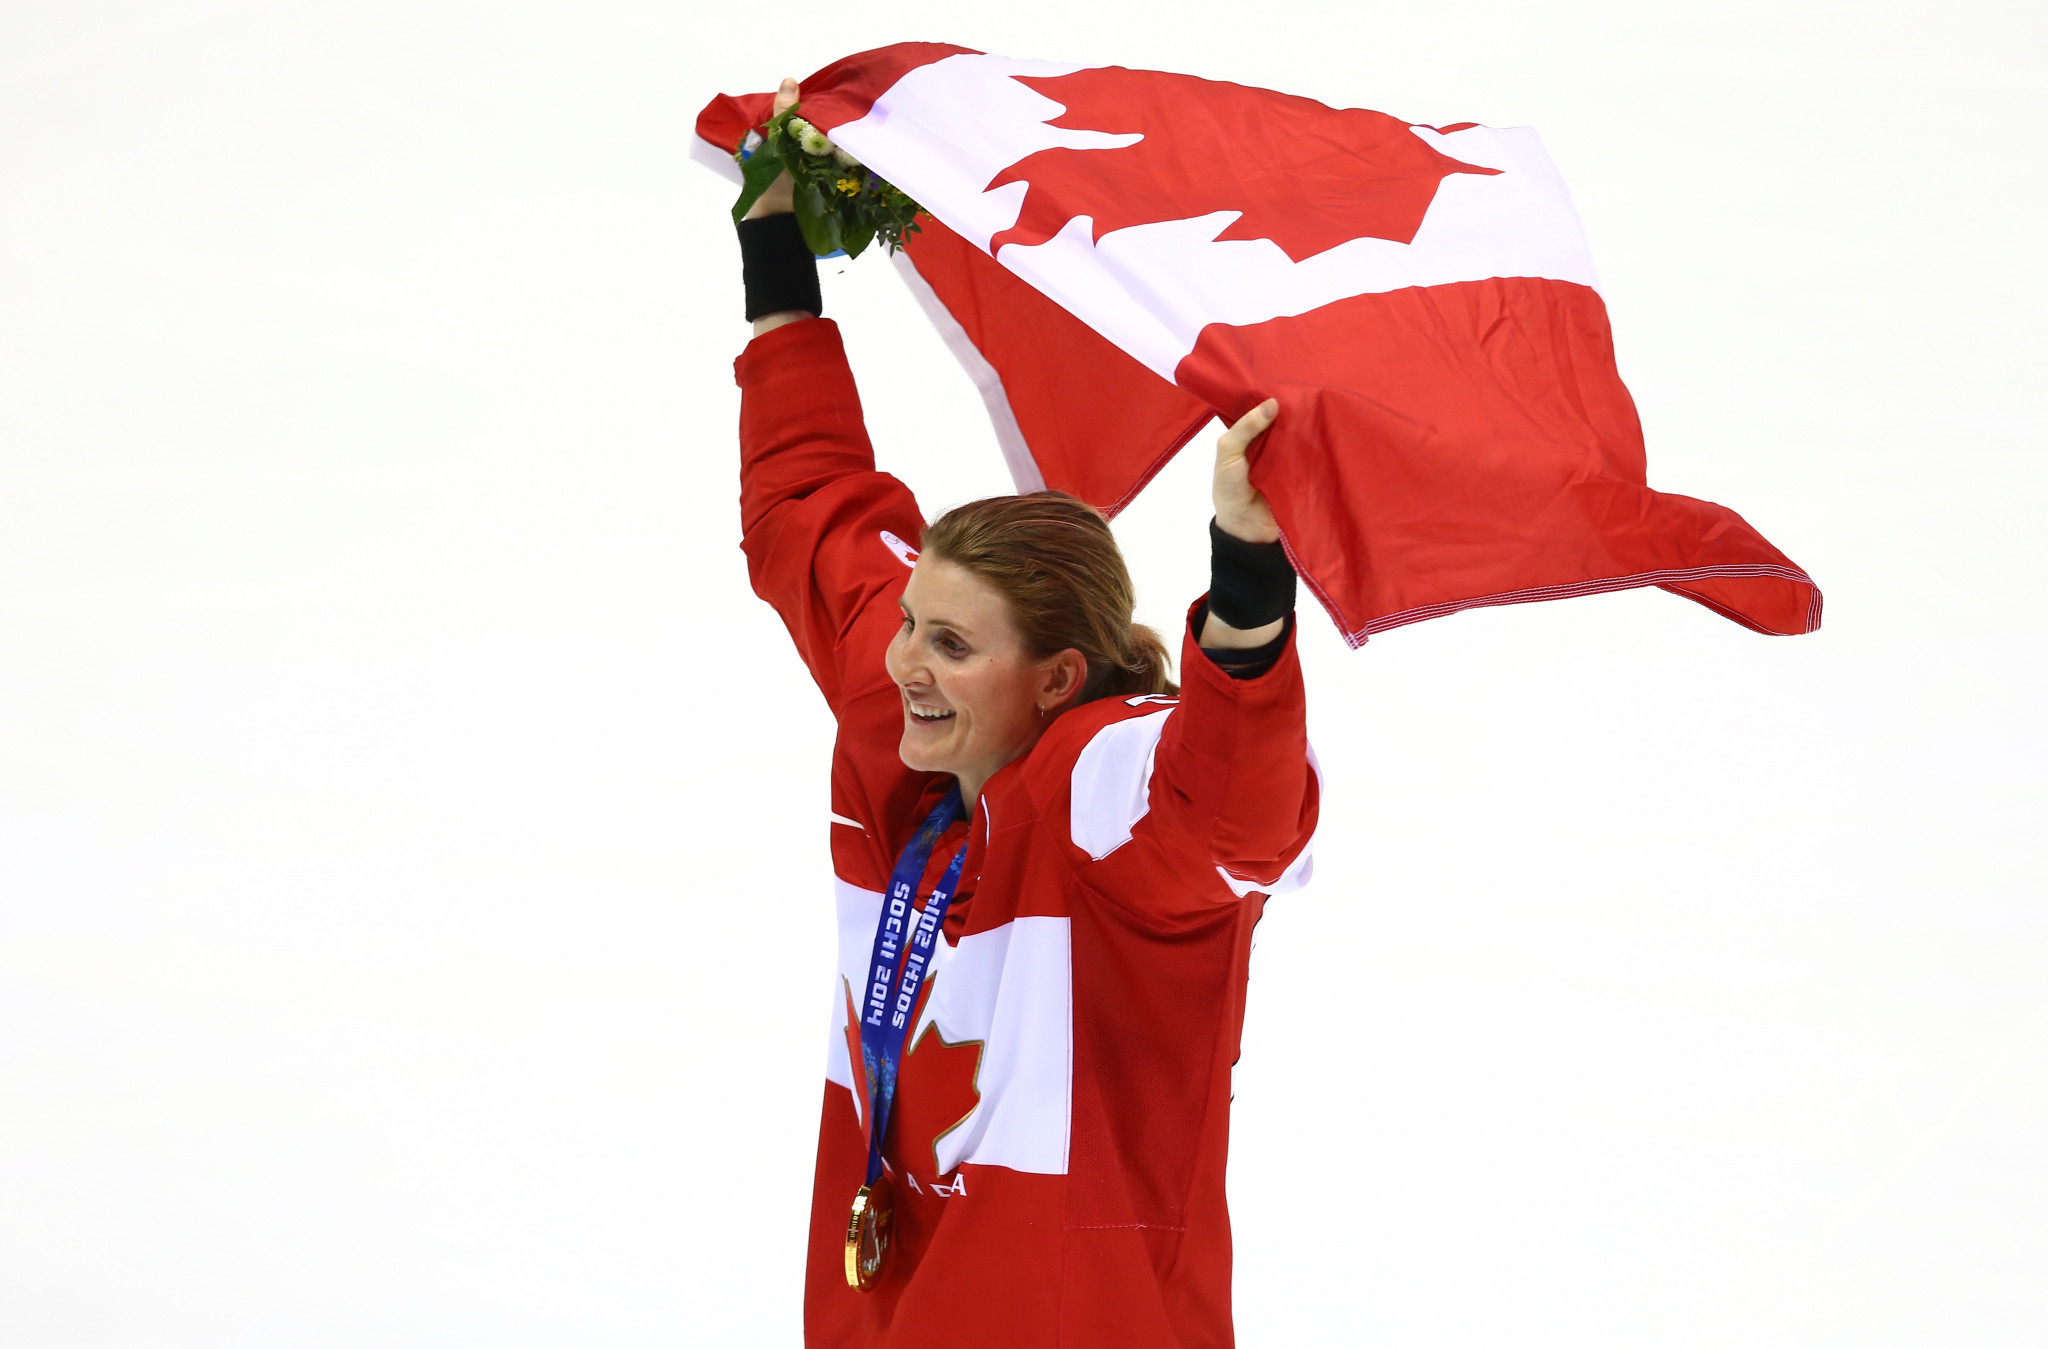 Four-time Olympic ice hockey champion Hayley Wickenheiser is among the athletes who believe the COC's stance shows it is 